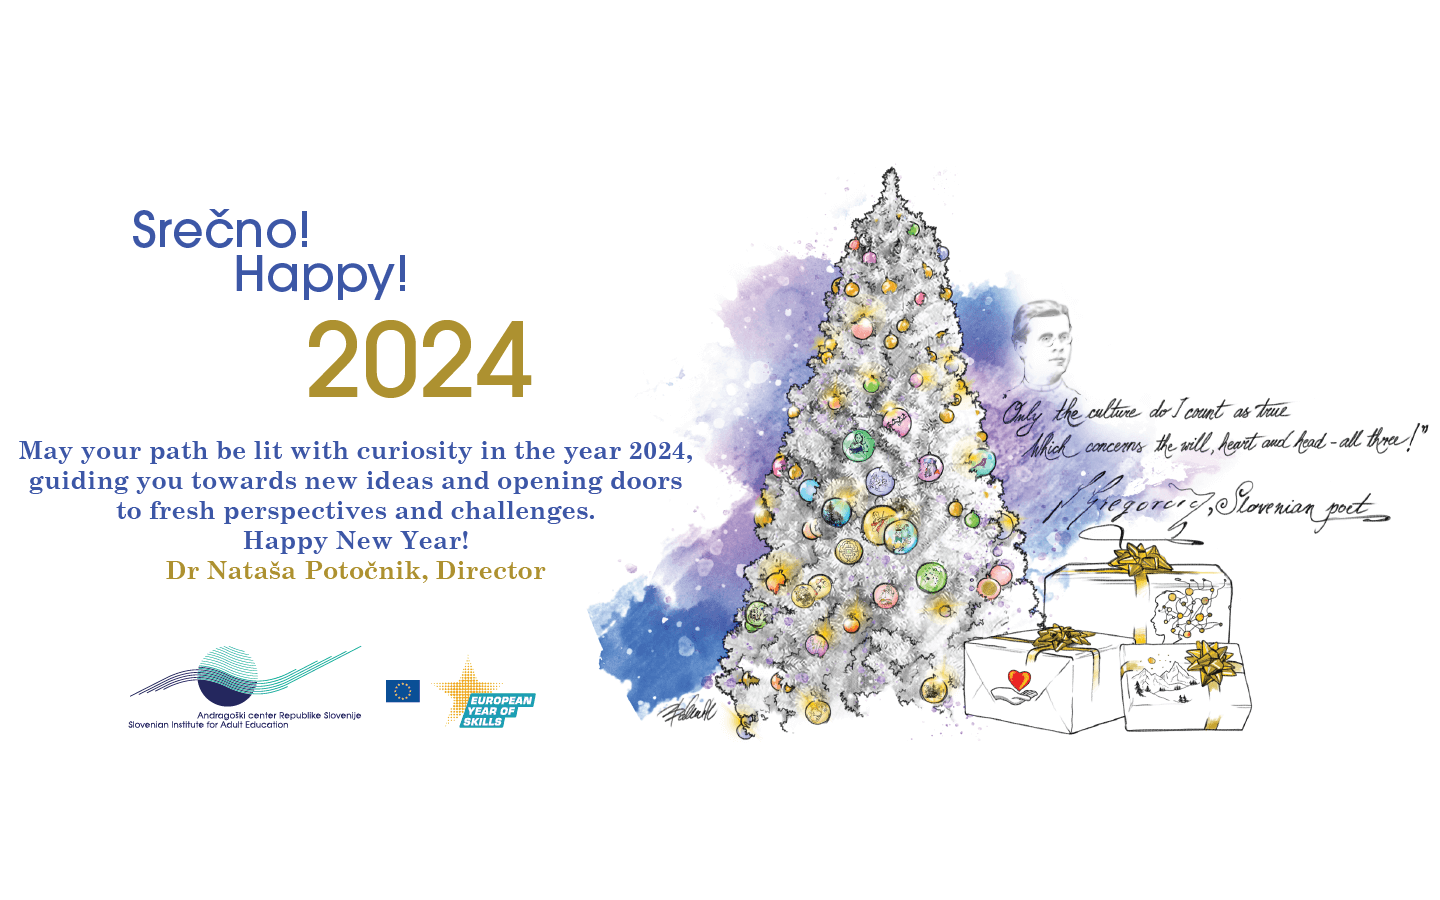 Picture of a decorated Christmas tree with gifts and a congratulatory message from the ACS Director: »May your path be lit with curiosity in the year 2024, guiding you towards new ideas and opening doors to fresh perspectives and challenges. Happy New Year!«